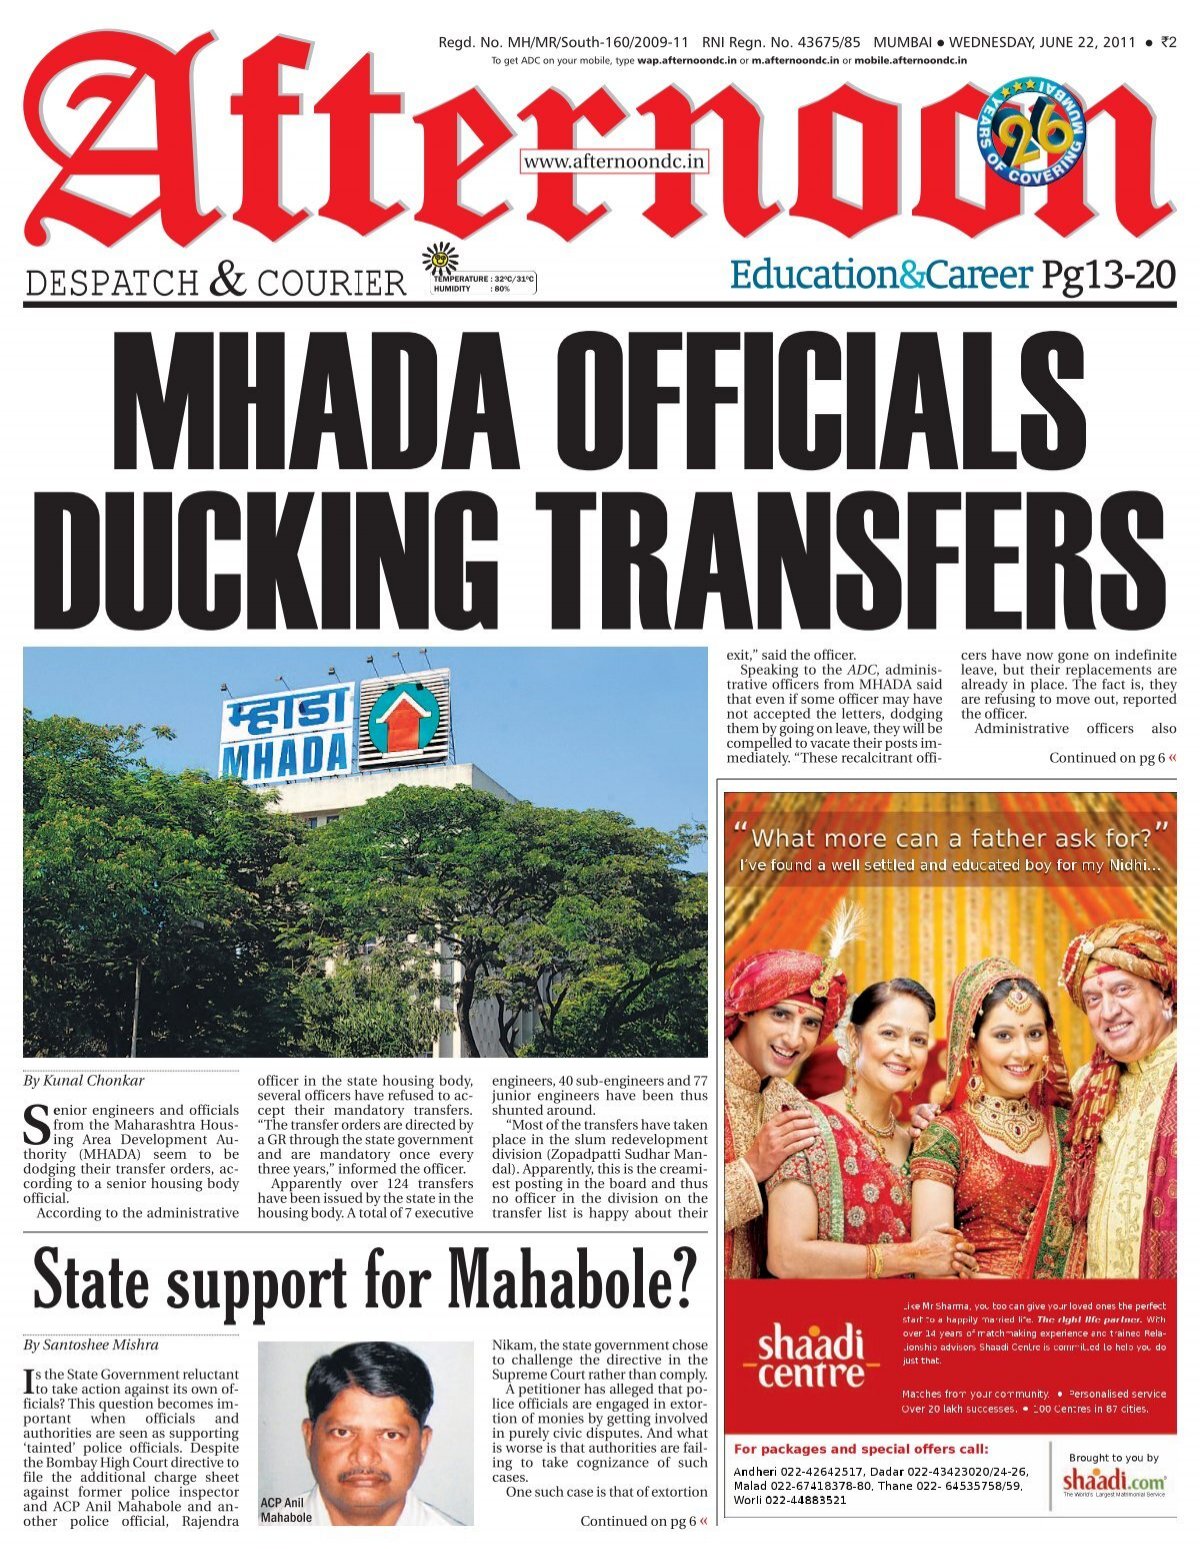 State support for Mahabole? - Afternoon DC